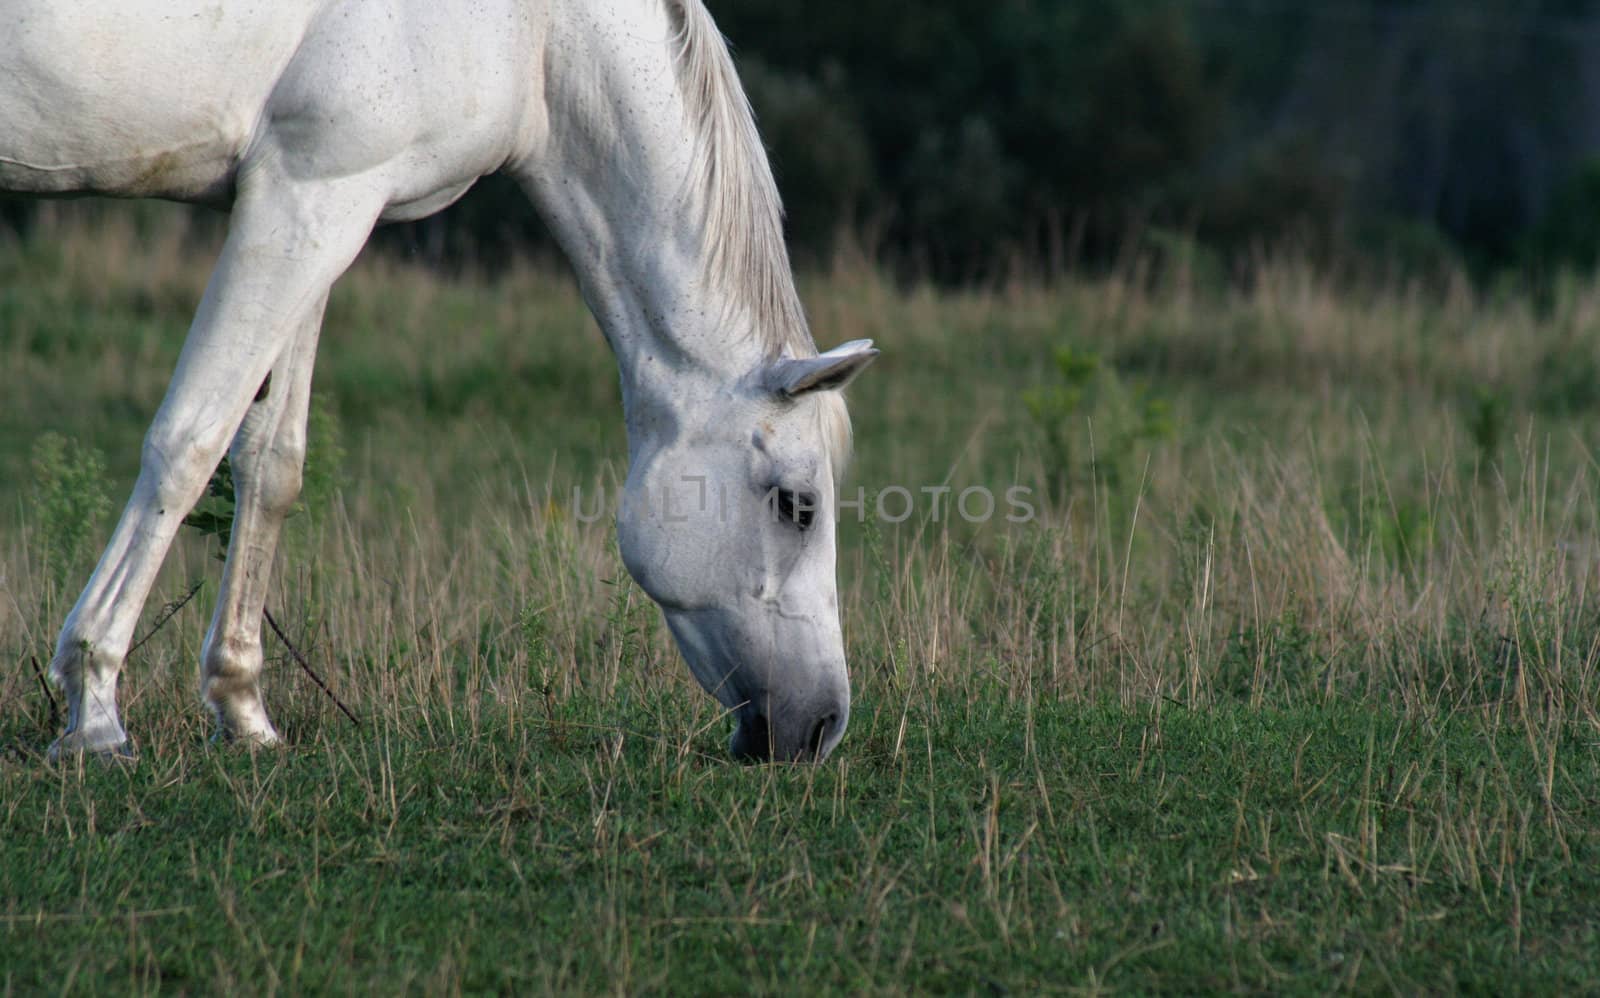 A beautiful white arabian horse feeds in a pasture.
